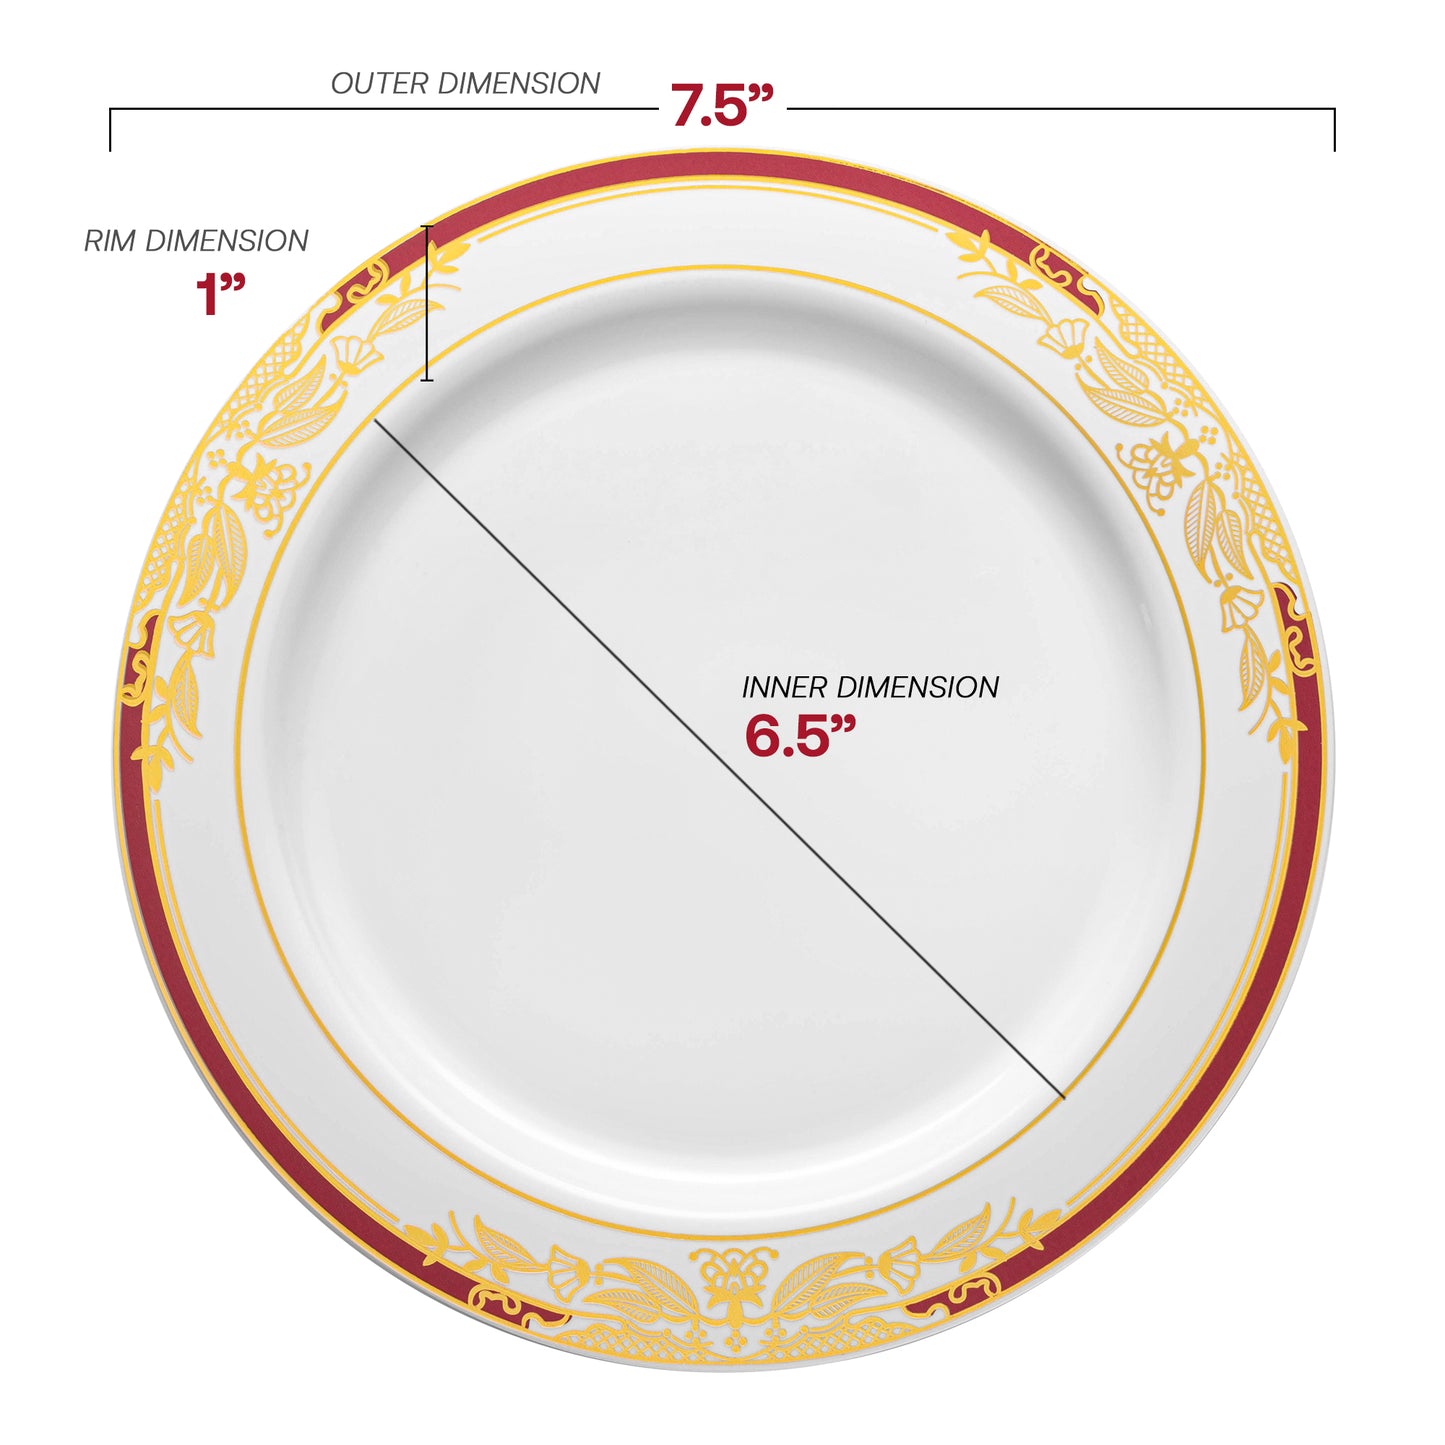 White with Burgundy and Gold Harmony Rim Plastic Appetizer/Salad Plates (7.5") Dimension | The Kaya Collection